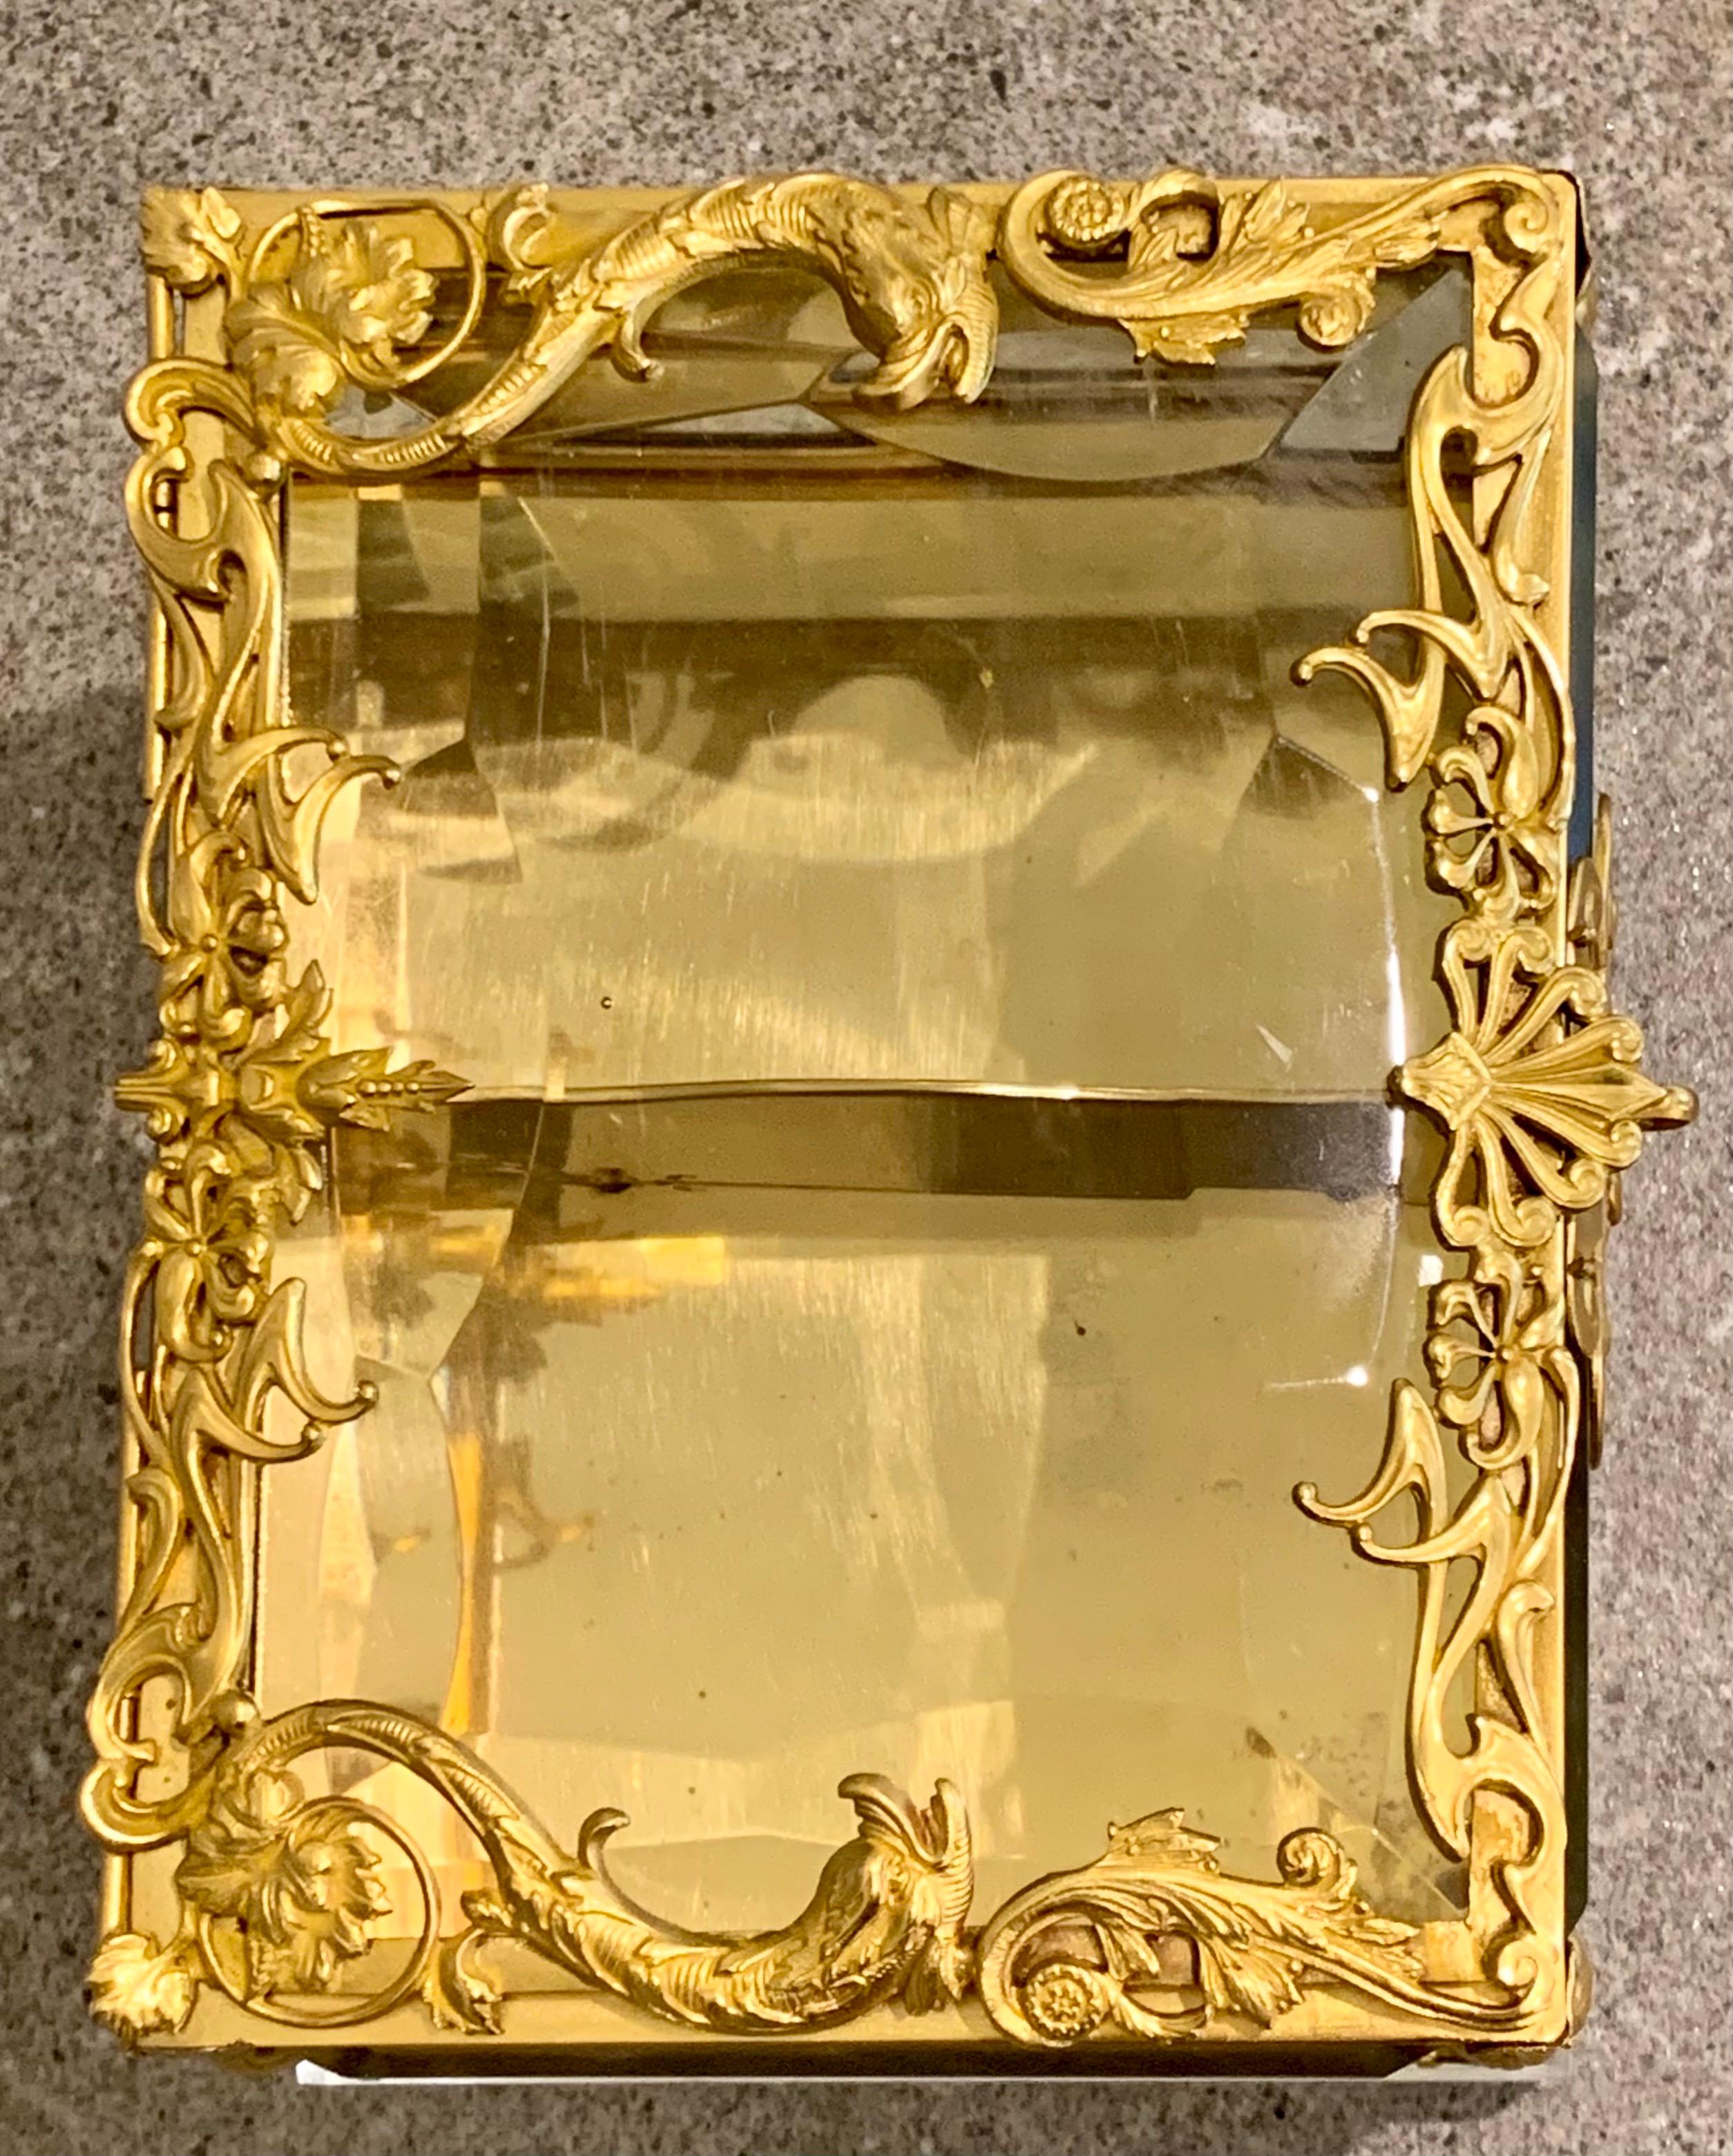 Large Napoleon III Ormolu Mounted Glass Casket / Box French In Good Condition For Sale In London, GB